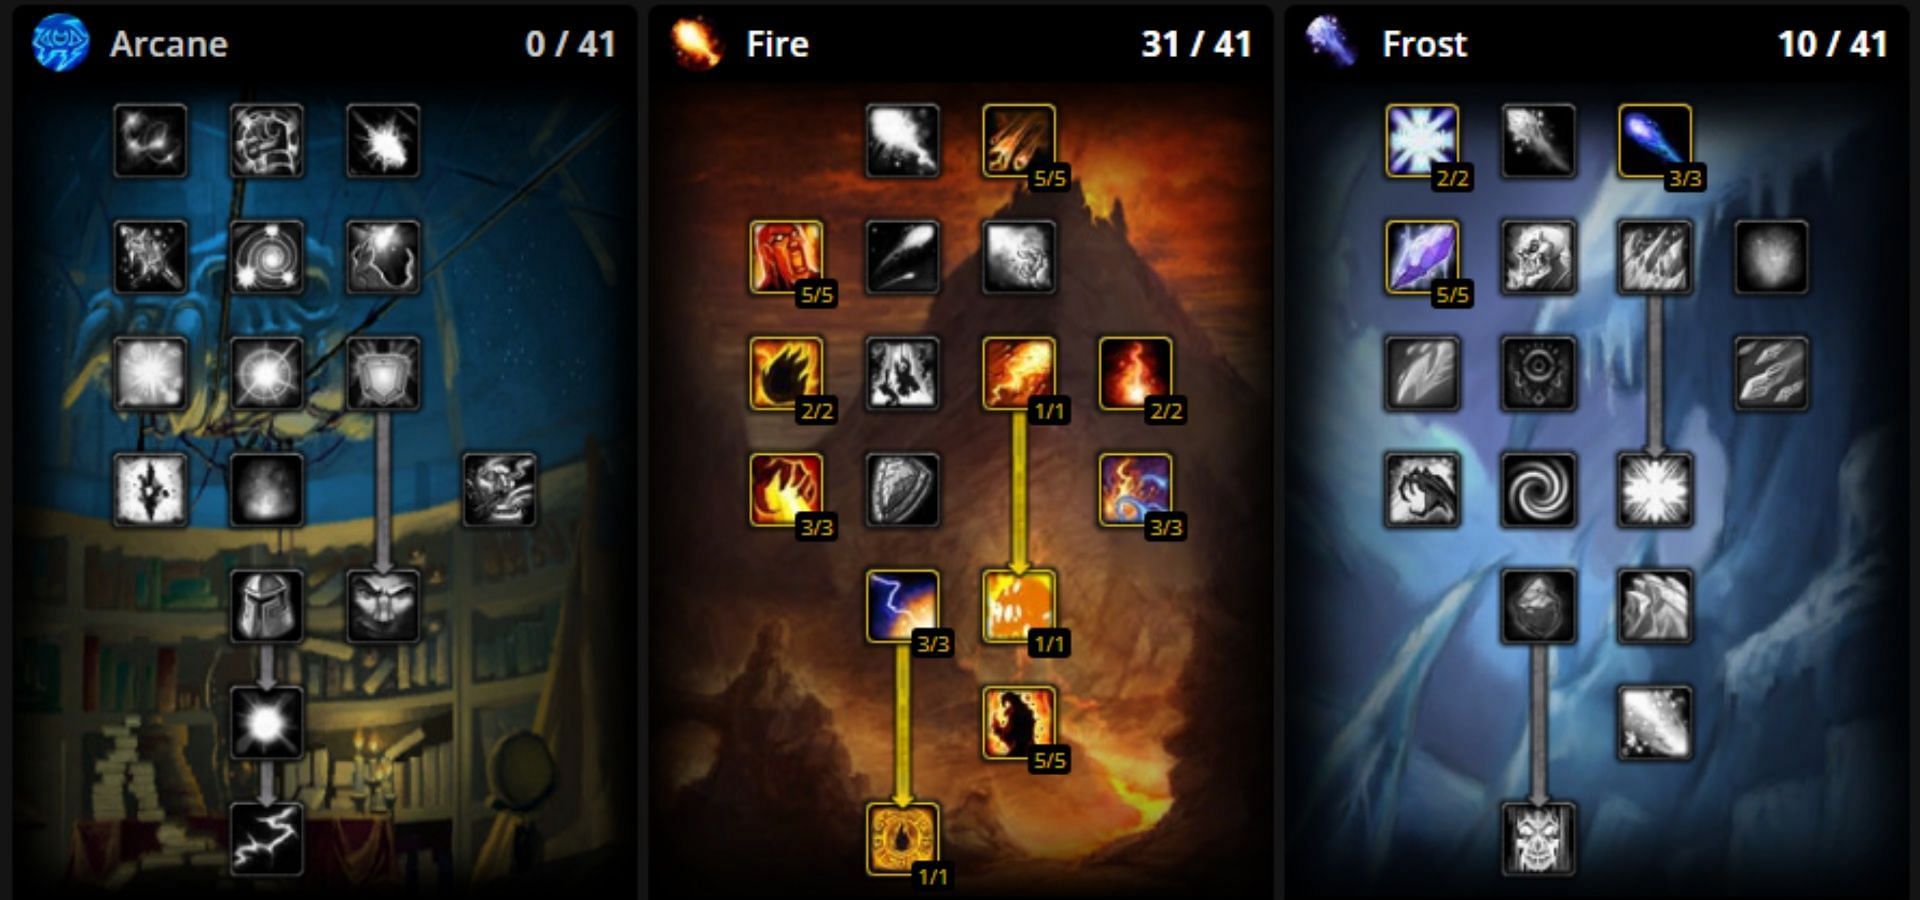 Fire Mage talents for Phase 3 courtesy of Wowhead&#039;s talent calculator (Image via Wowhead.com)